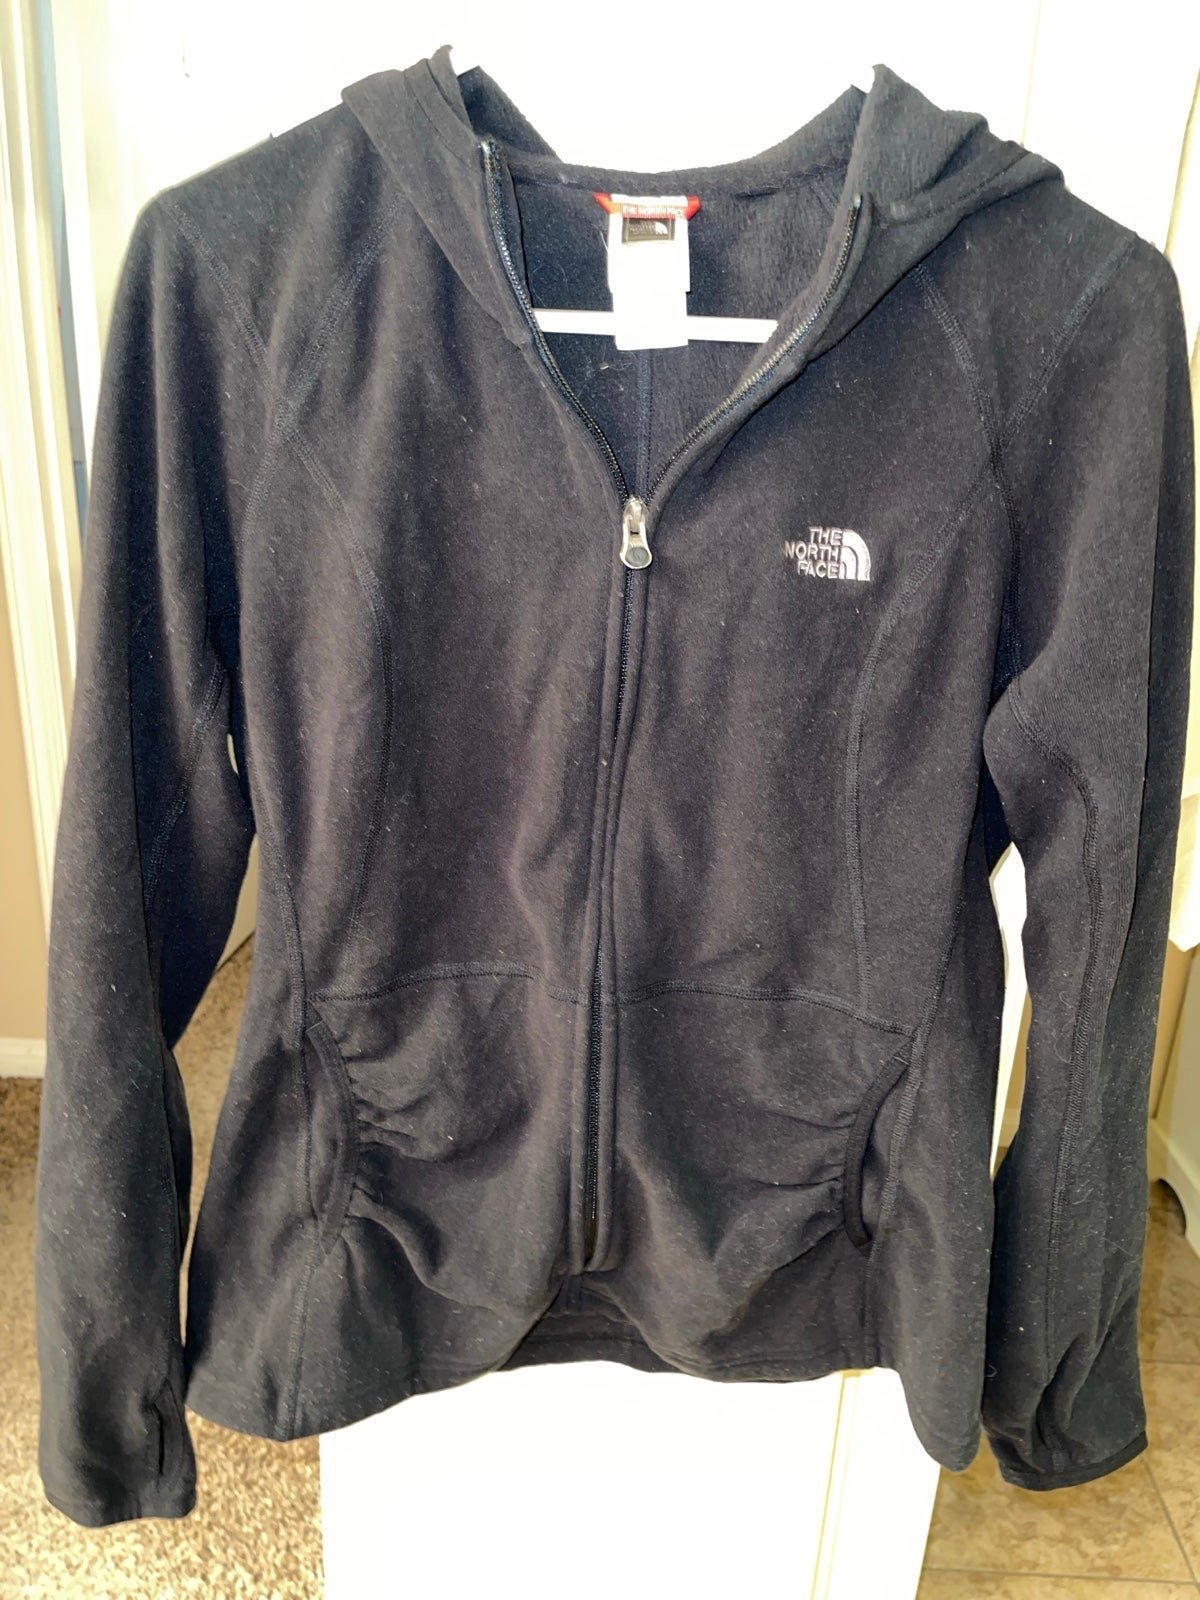 Discounted North Face Black Fleece Zip Up Hooded Jacket gkstHUHxS best sale